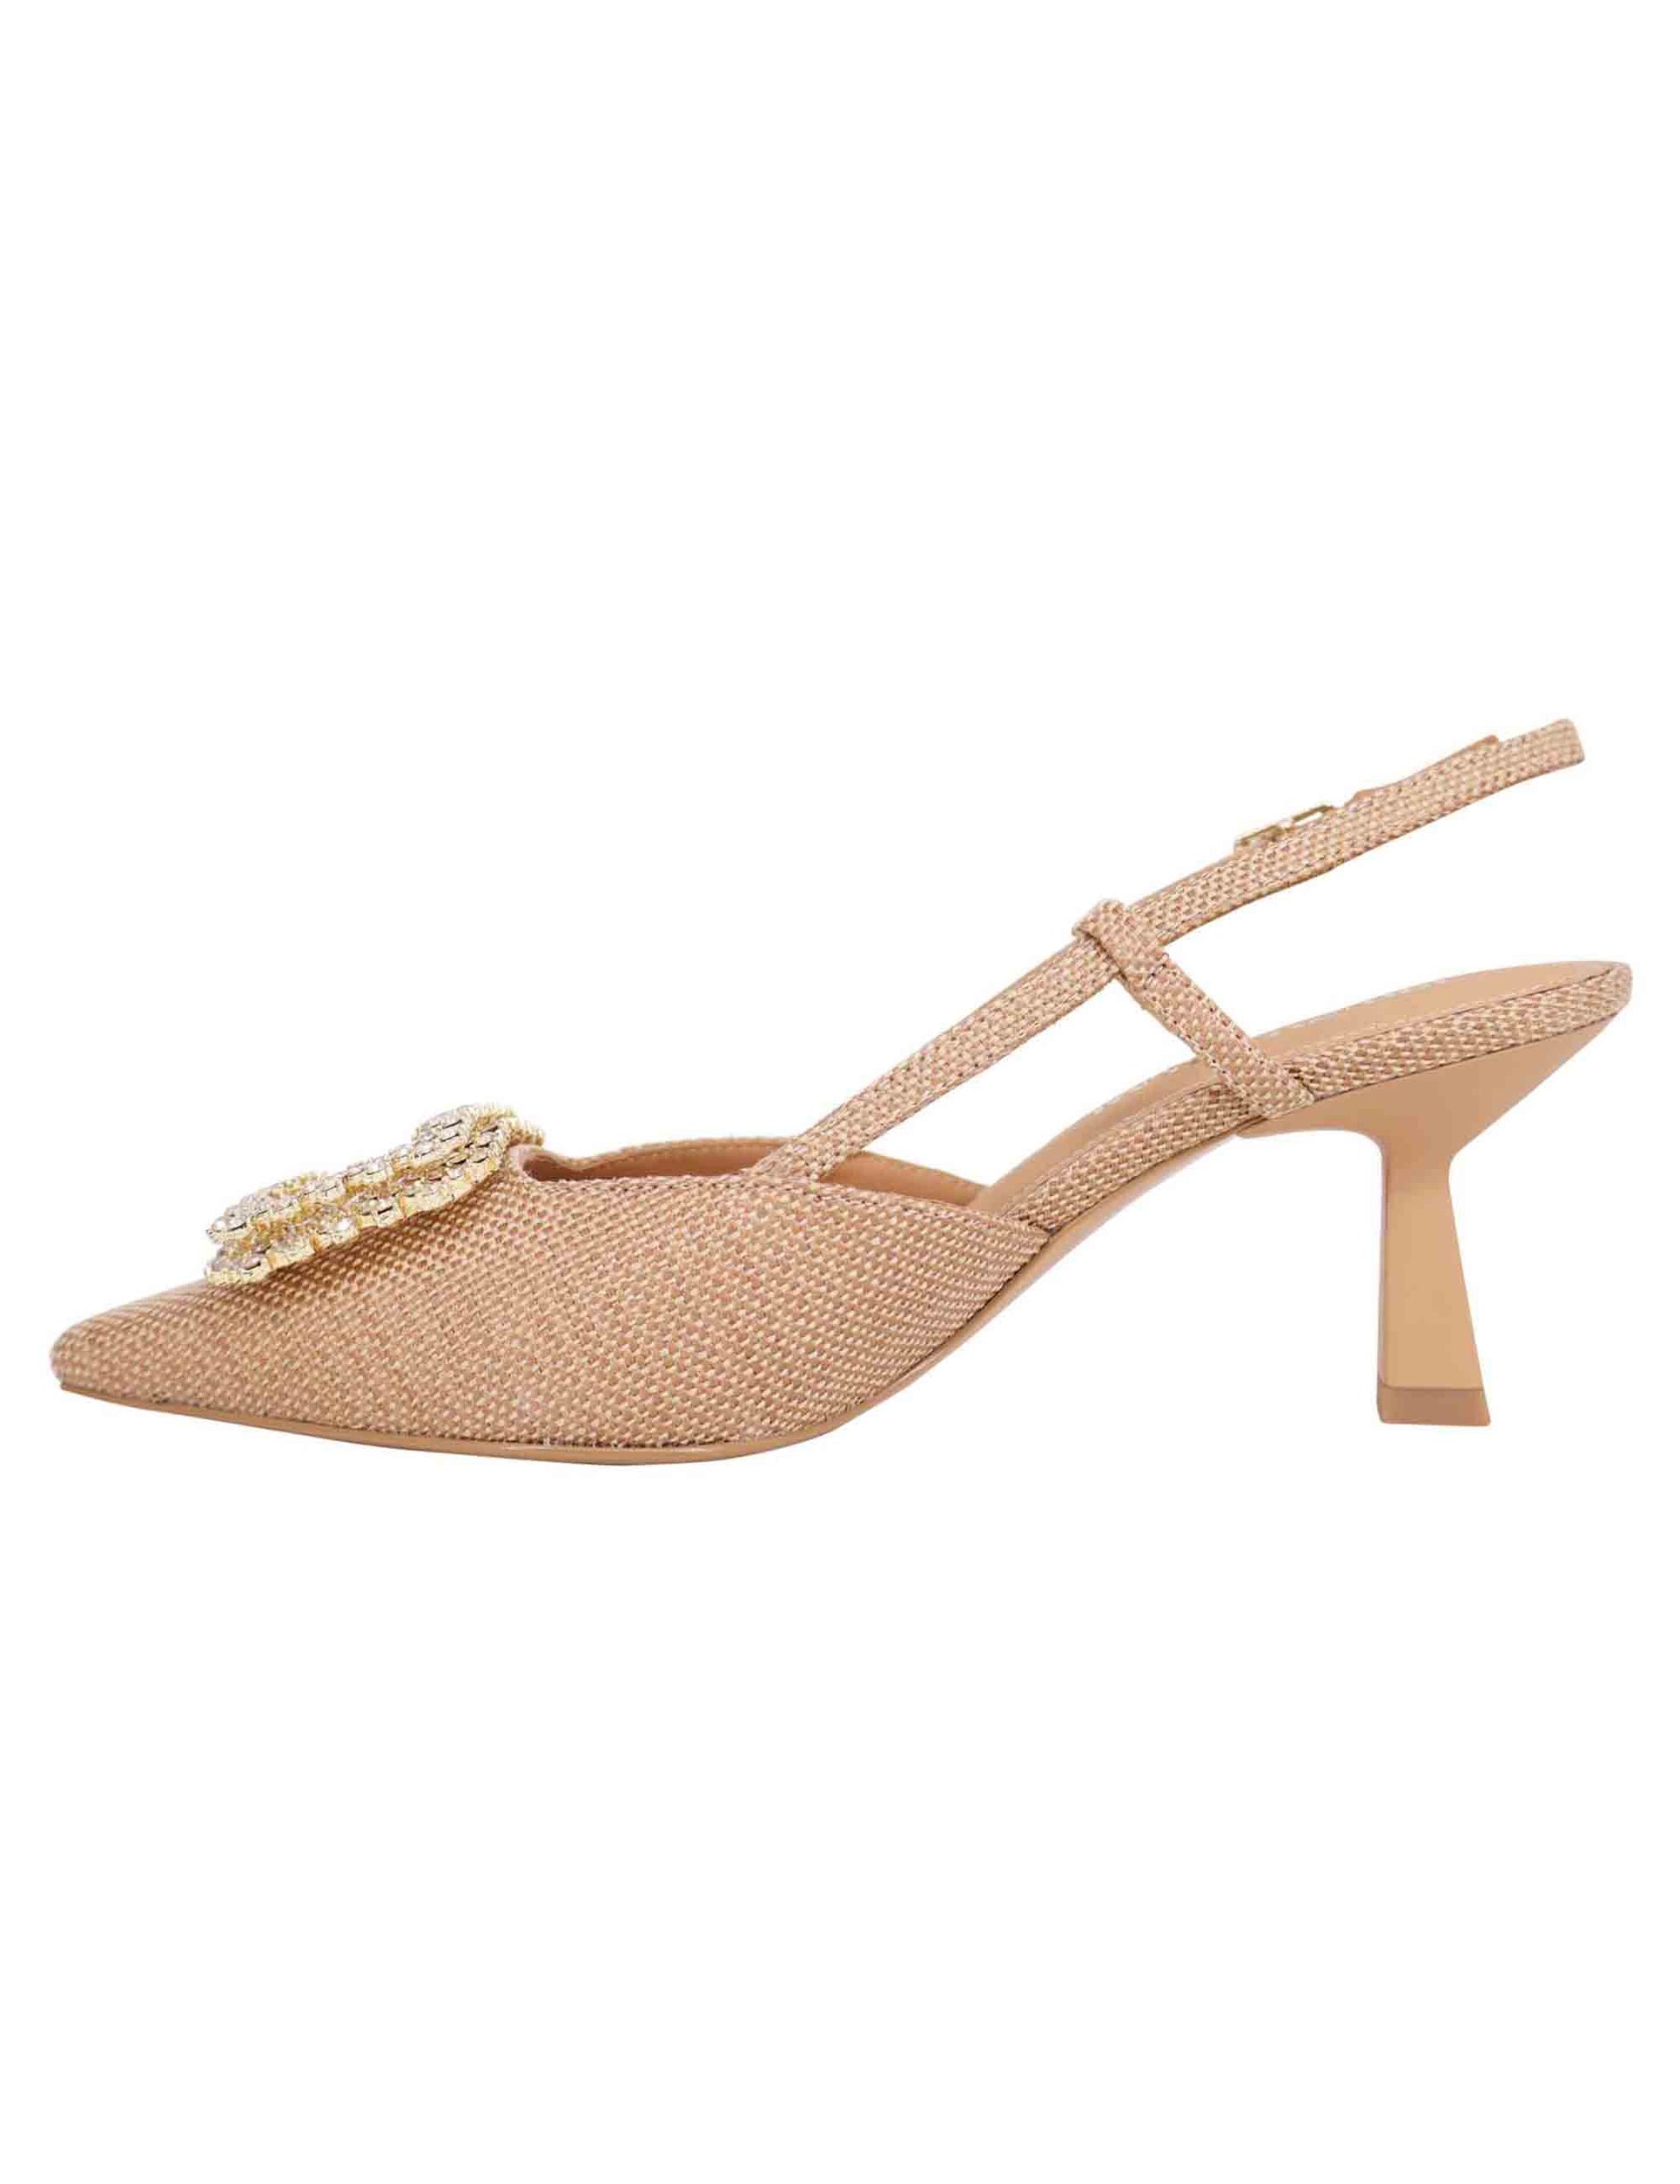 Women's slingback pumps in natural fabric with rhinestone buckle and high heel